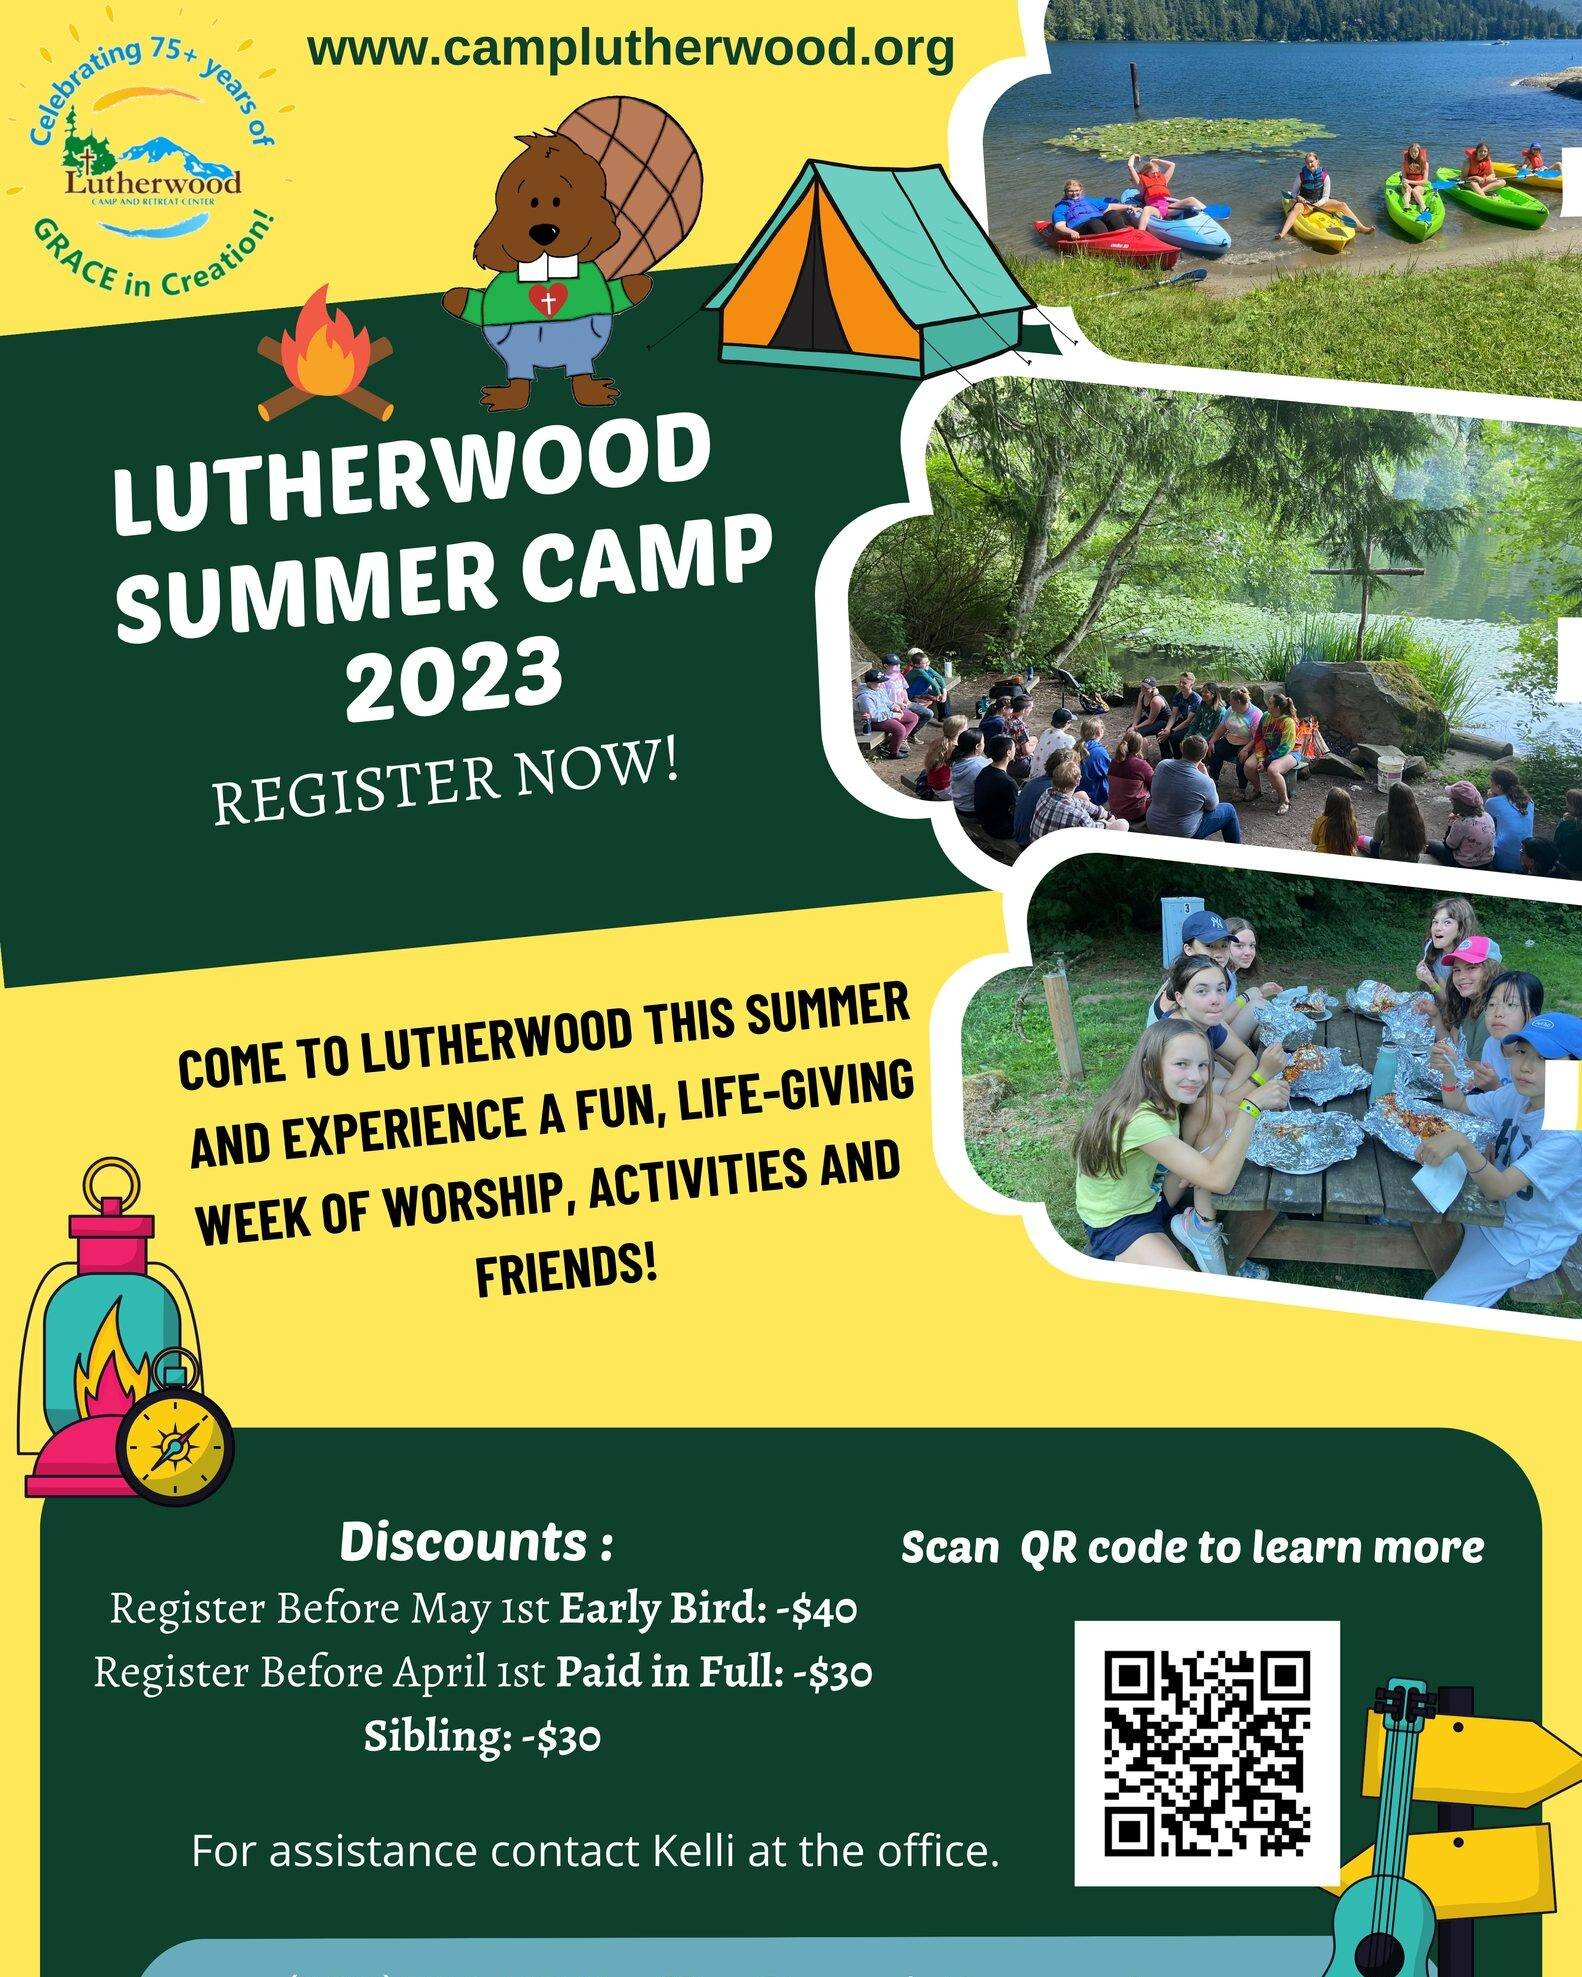 Registration for Lutherwood Summer Camp 2023 is open!
Come to Lutherwood this summer and experience a week of fun summer activities while hanging out in a beautiful part of God's creation, grow in your faith while hanging out with friends!
Visit the 